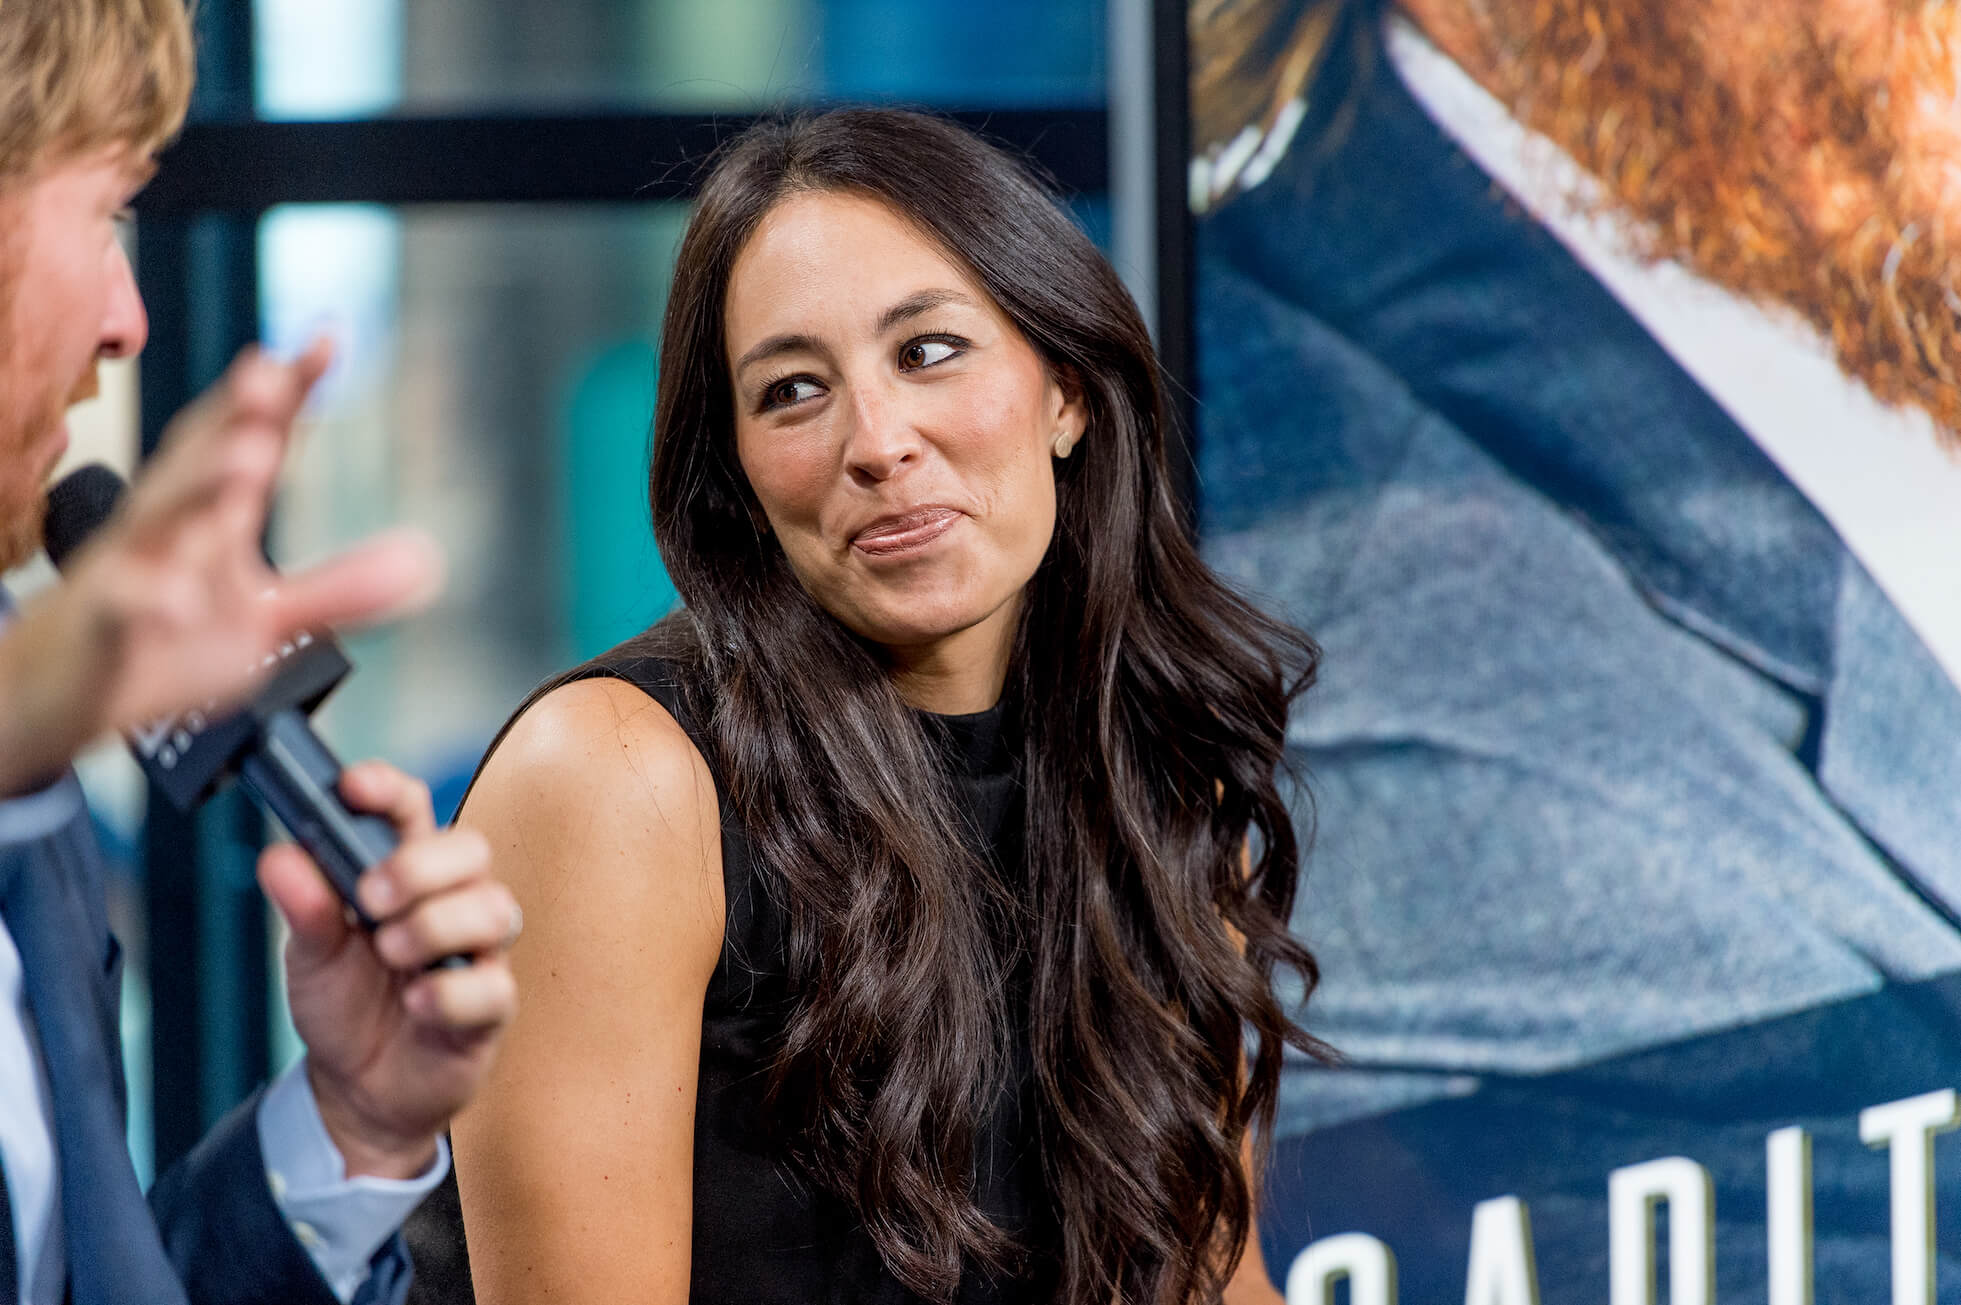 Joanna Gaines looking at Chip Gaines during an interview